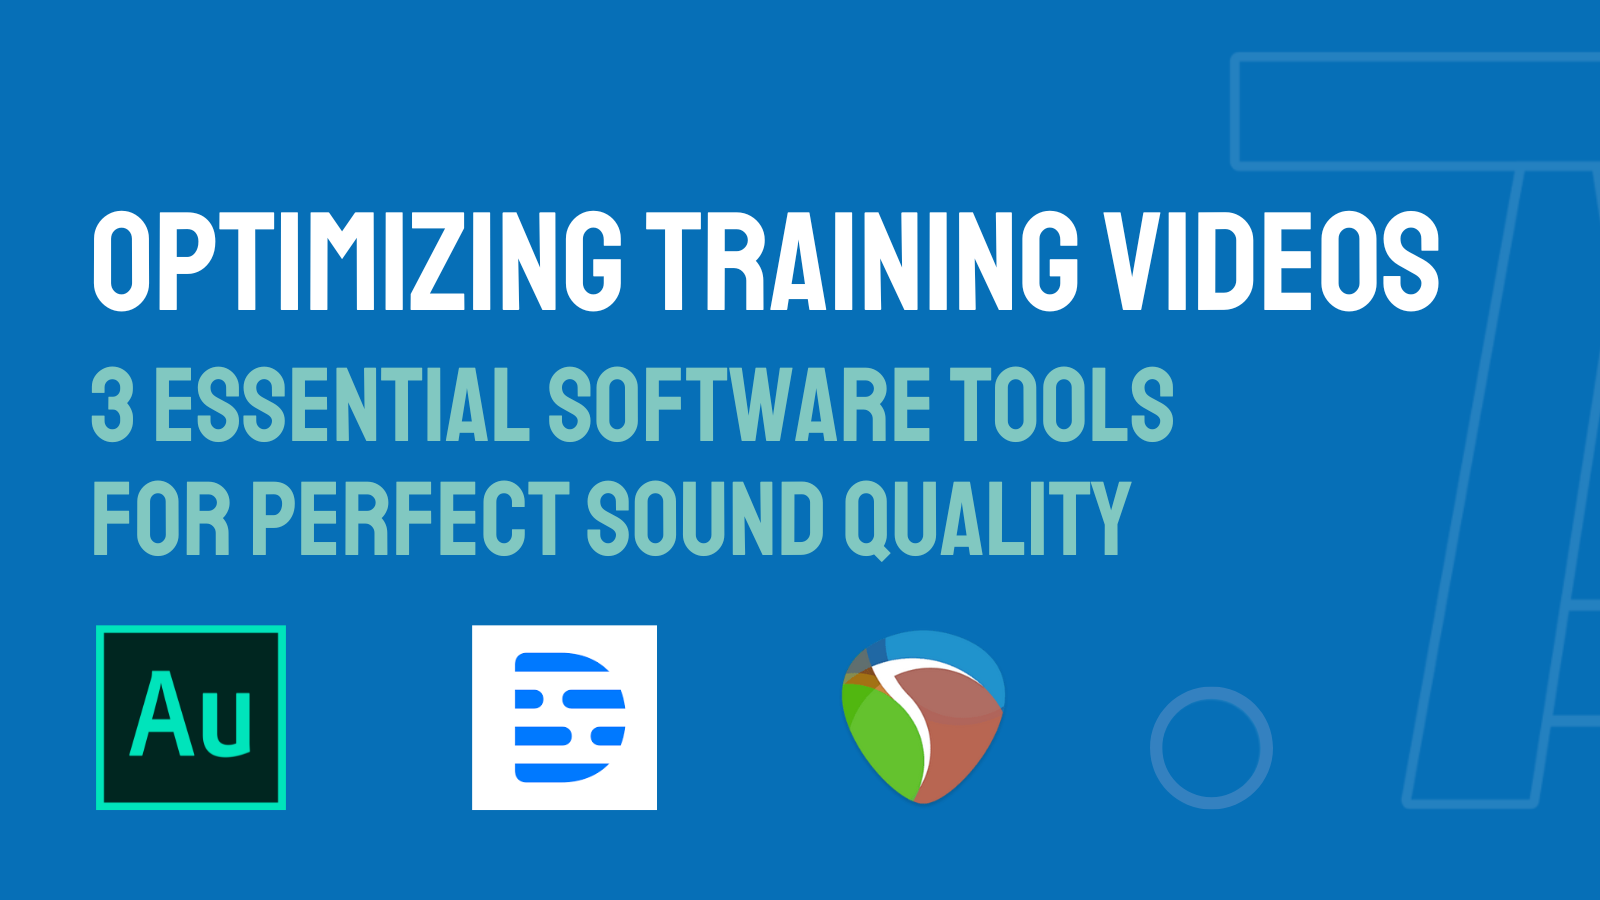 3 Essential Software Tools for Perfect Sound Quality